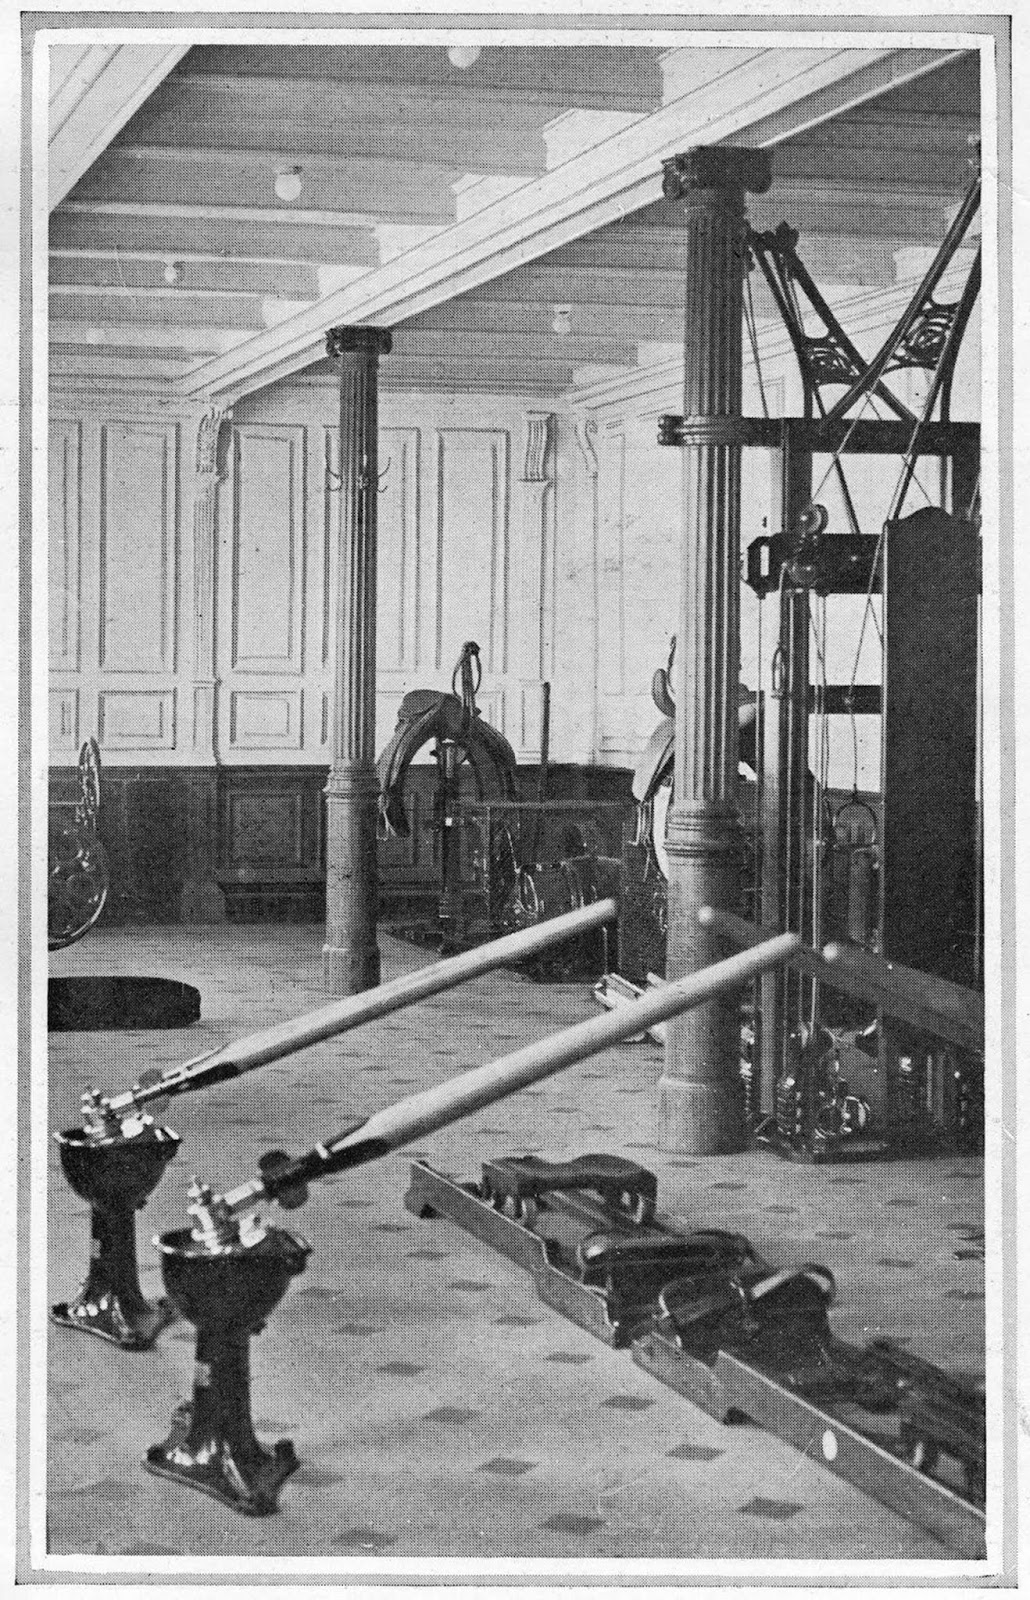 The gymnasium on the Titanic. Passengers could ride on a mechanical saddle or exercise 